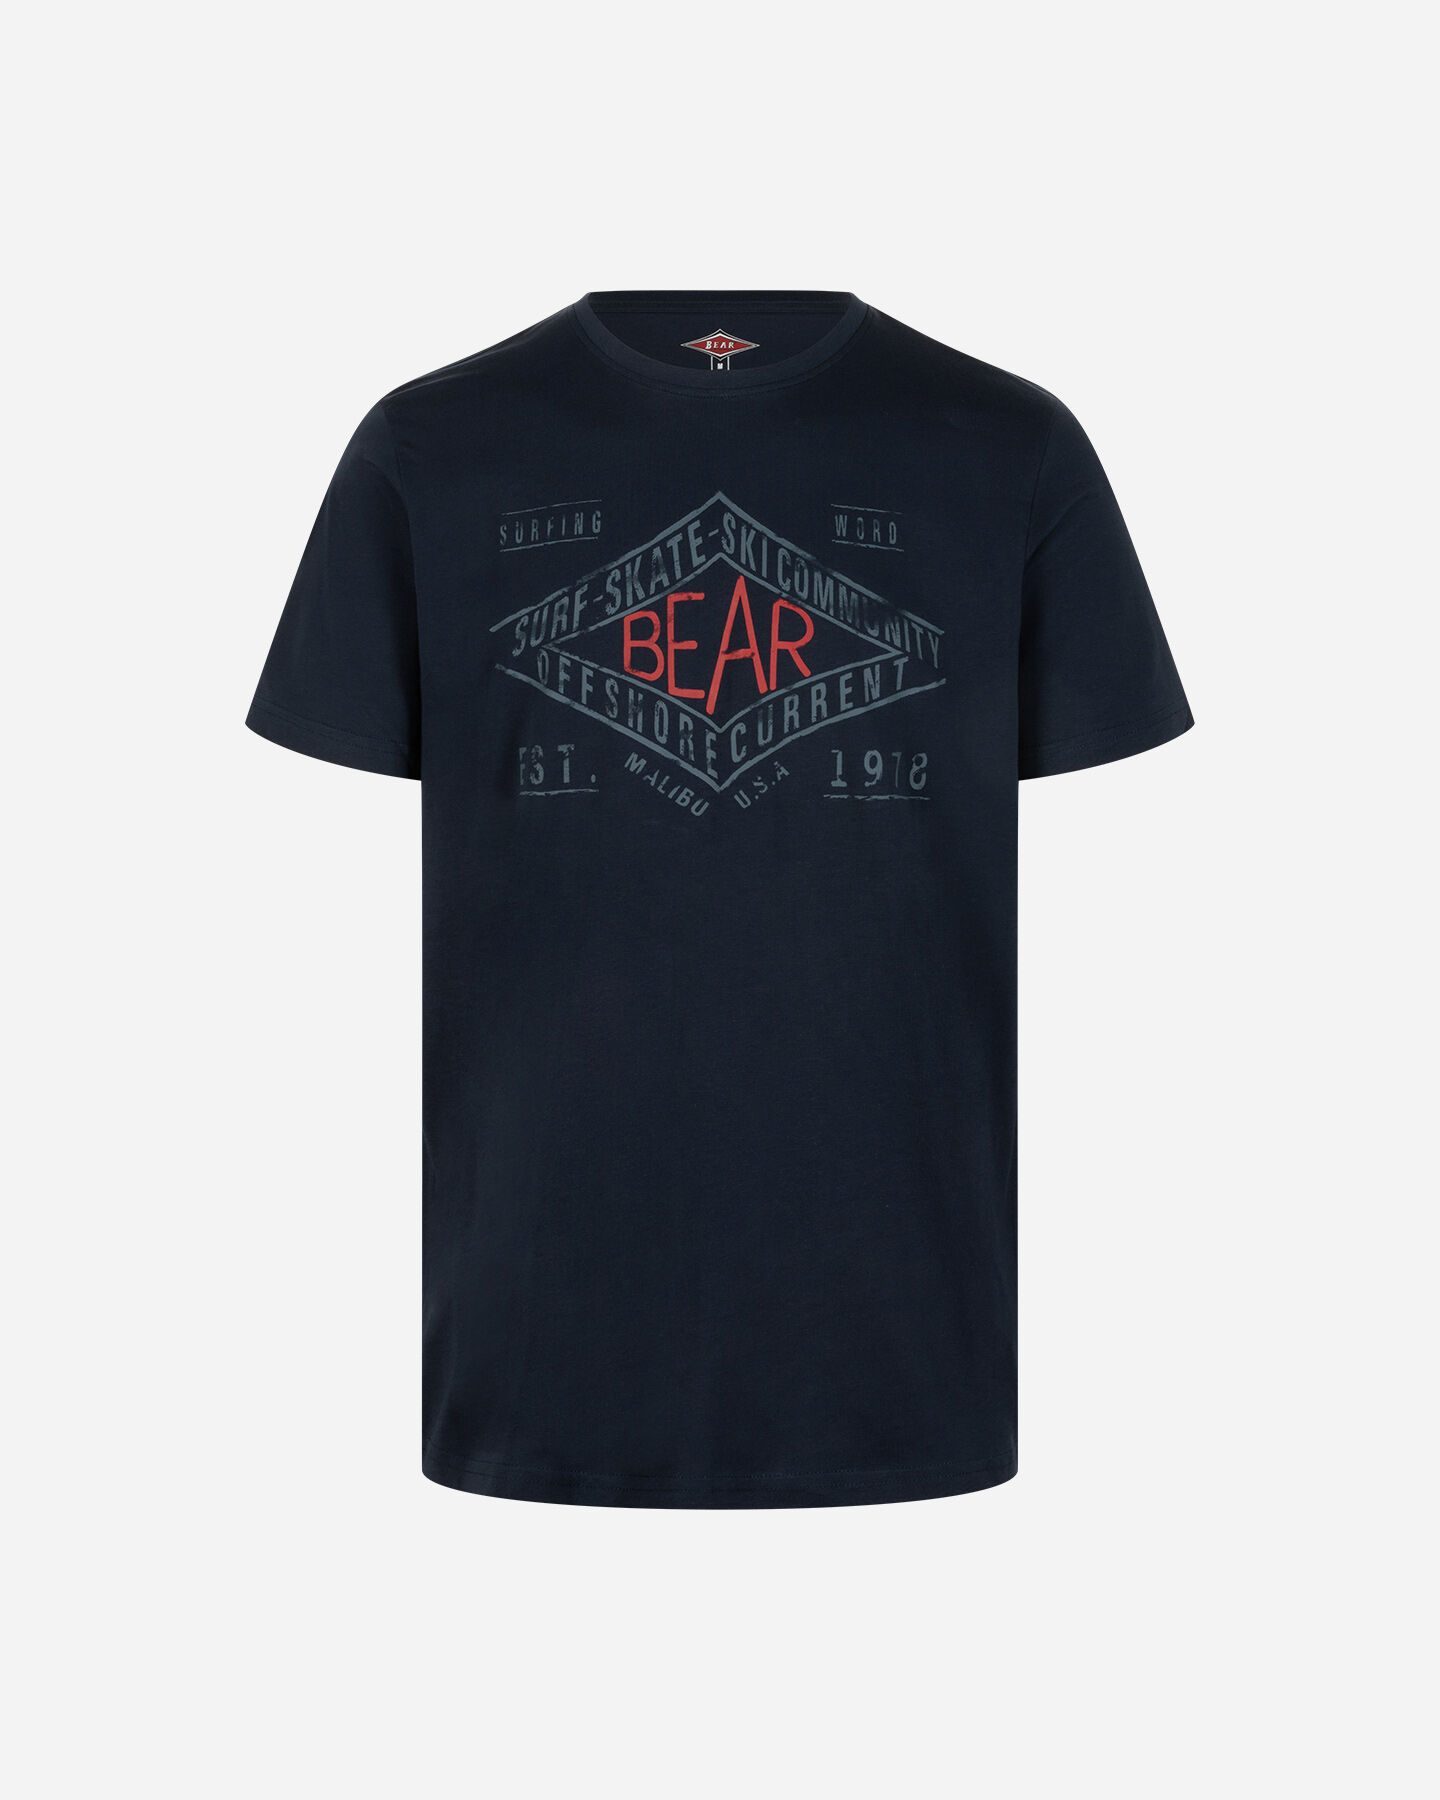  T-Shirt BEAR HERITAGE M S4131624|914|S scatto 5